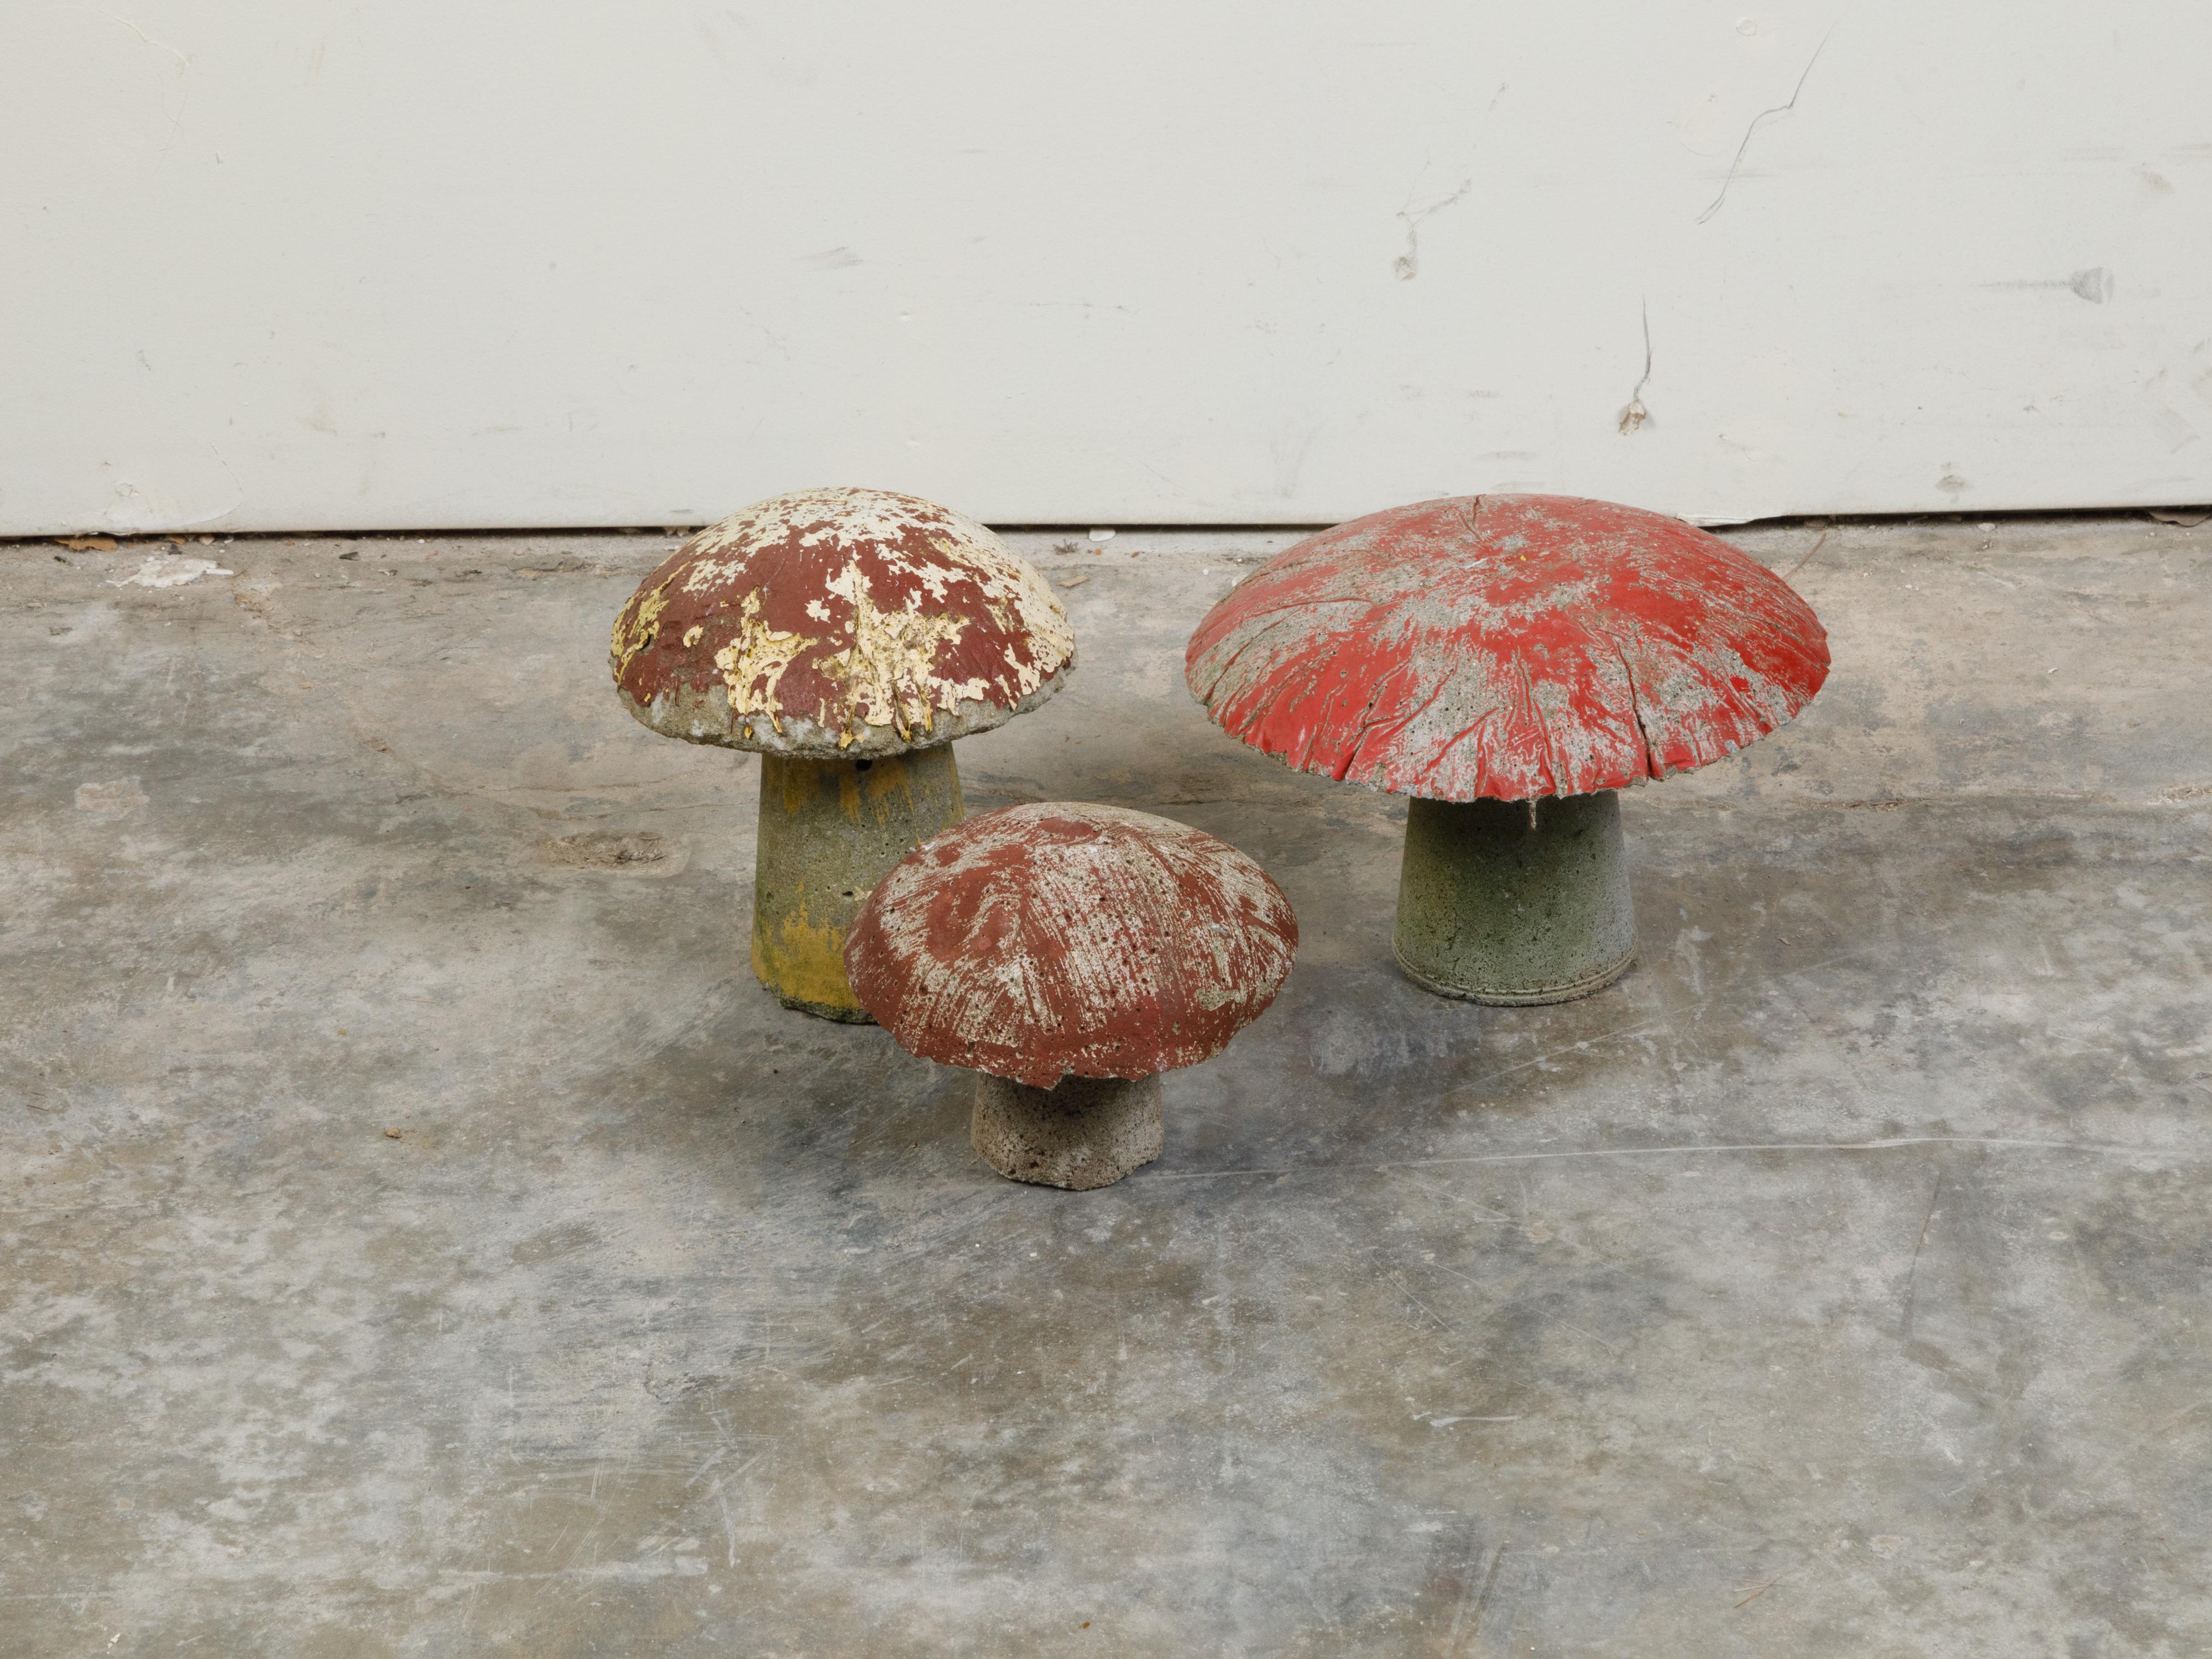 A set of three vintage American concrete mushrooms from the mid 20th century, with nicely worn patina. Made in the USA during the midcentury period, this set of three concrete mushrooms boasts a nicely weathered appearance with red, yellow and green